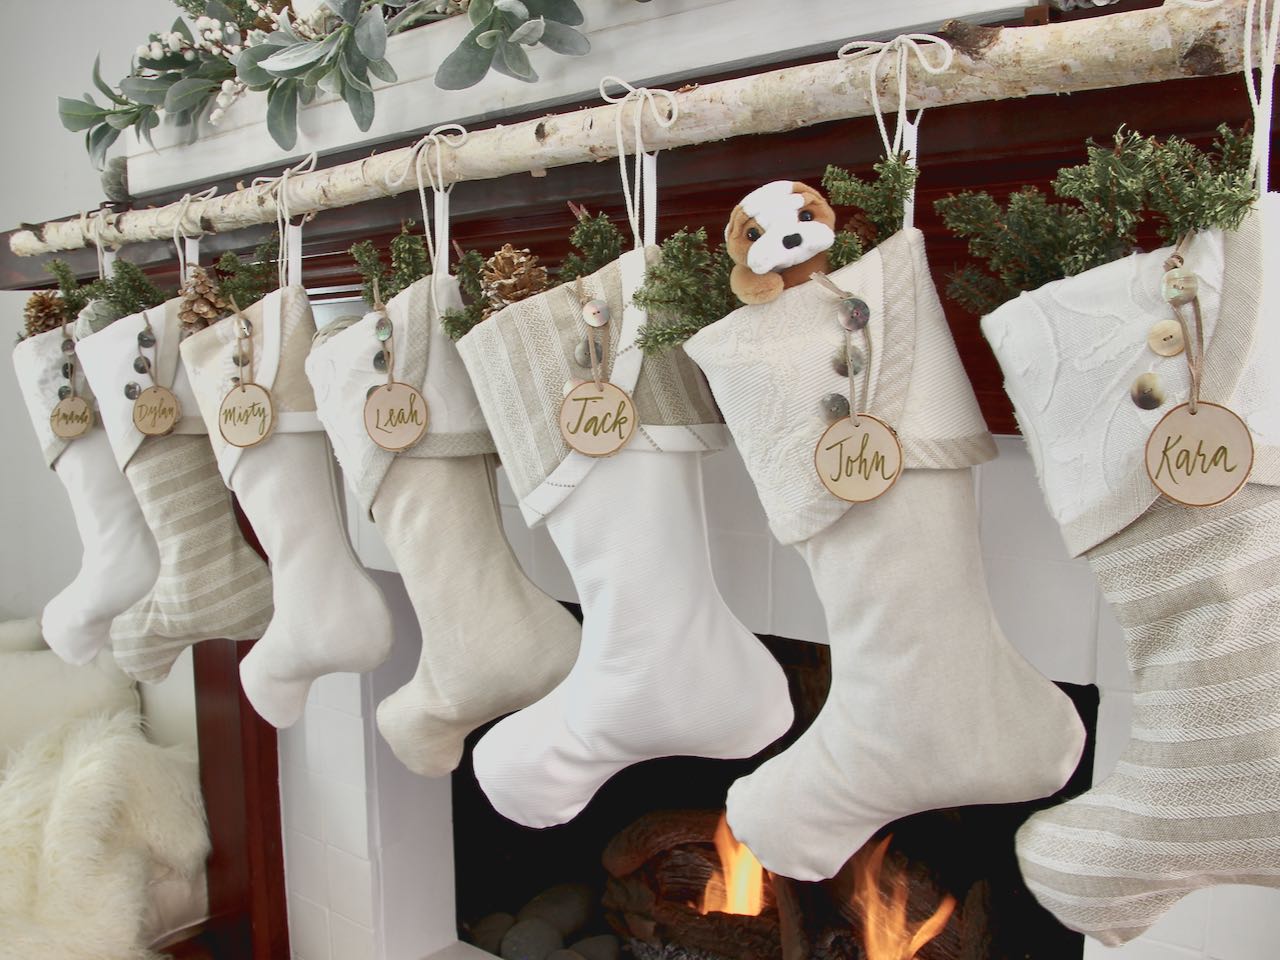 3 coordinating yet unique Christmas stockings are hanging from a mantel above a fire. Birch slice name tags hang from the top of three buttons on each cuff